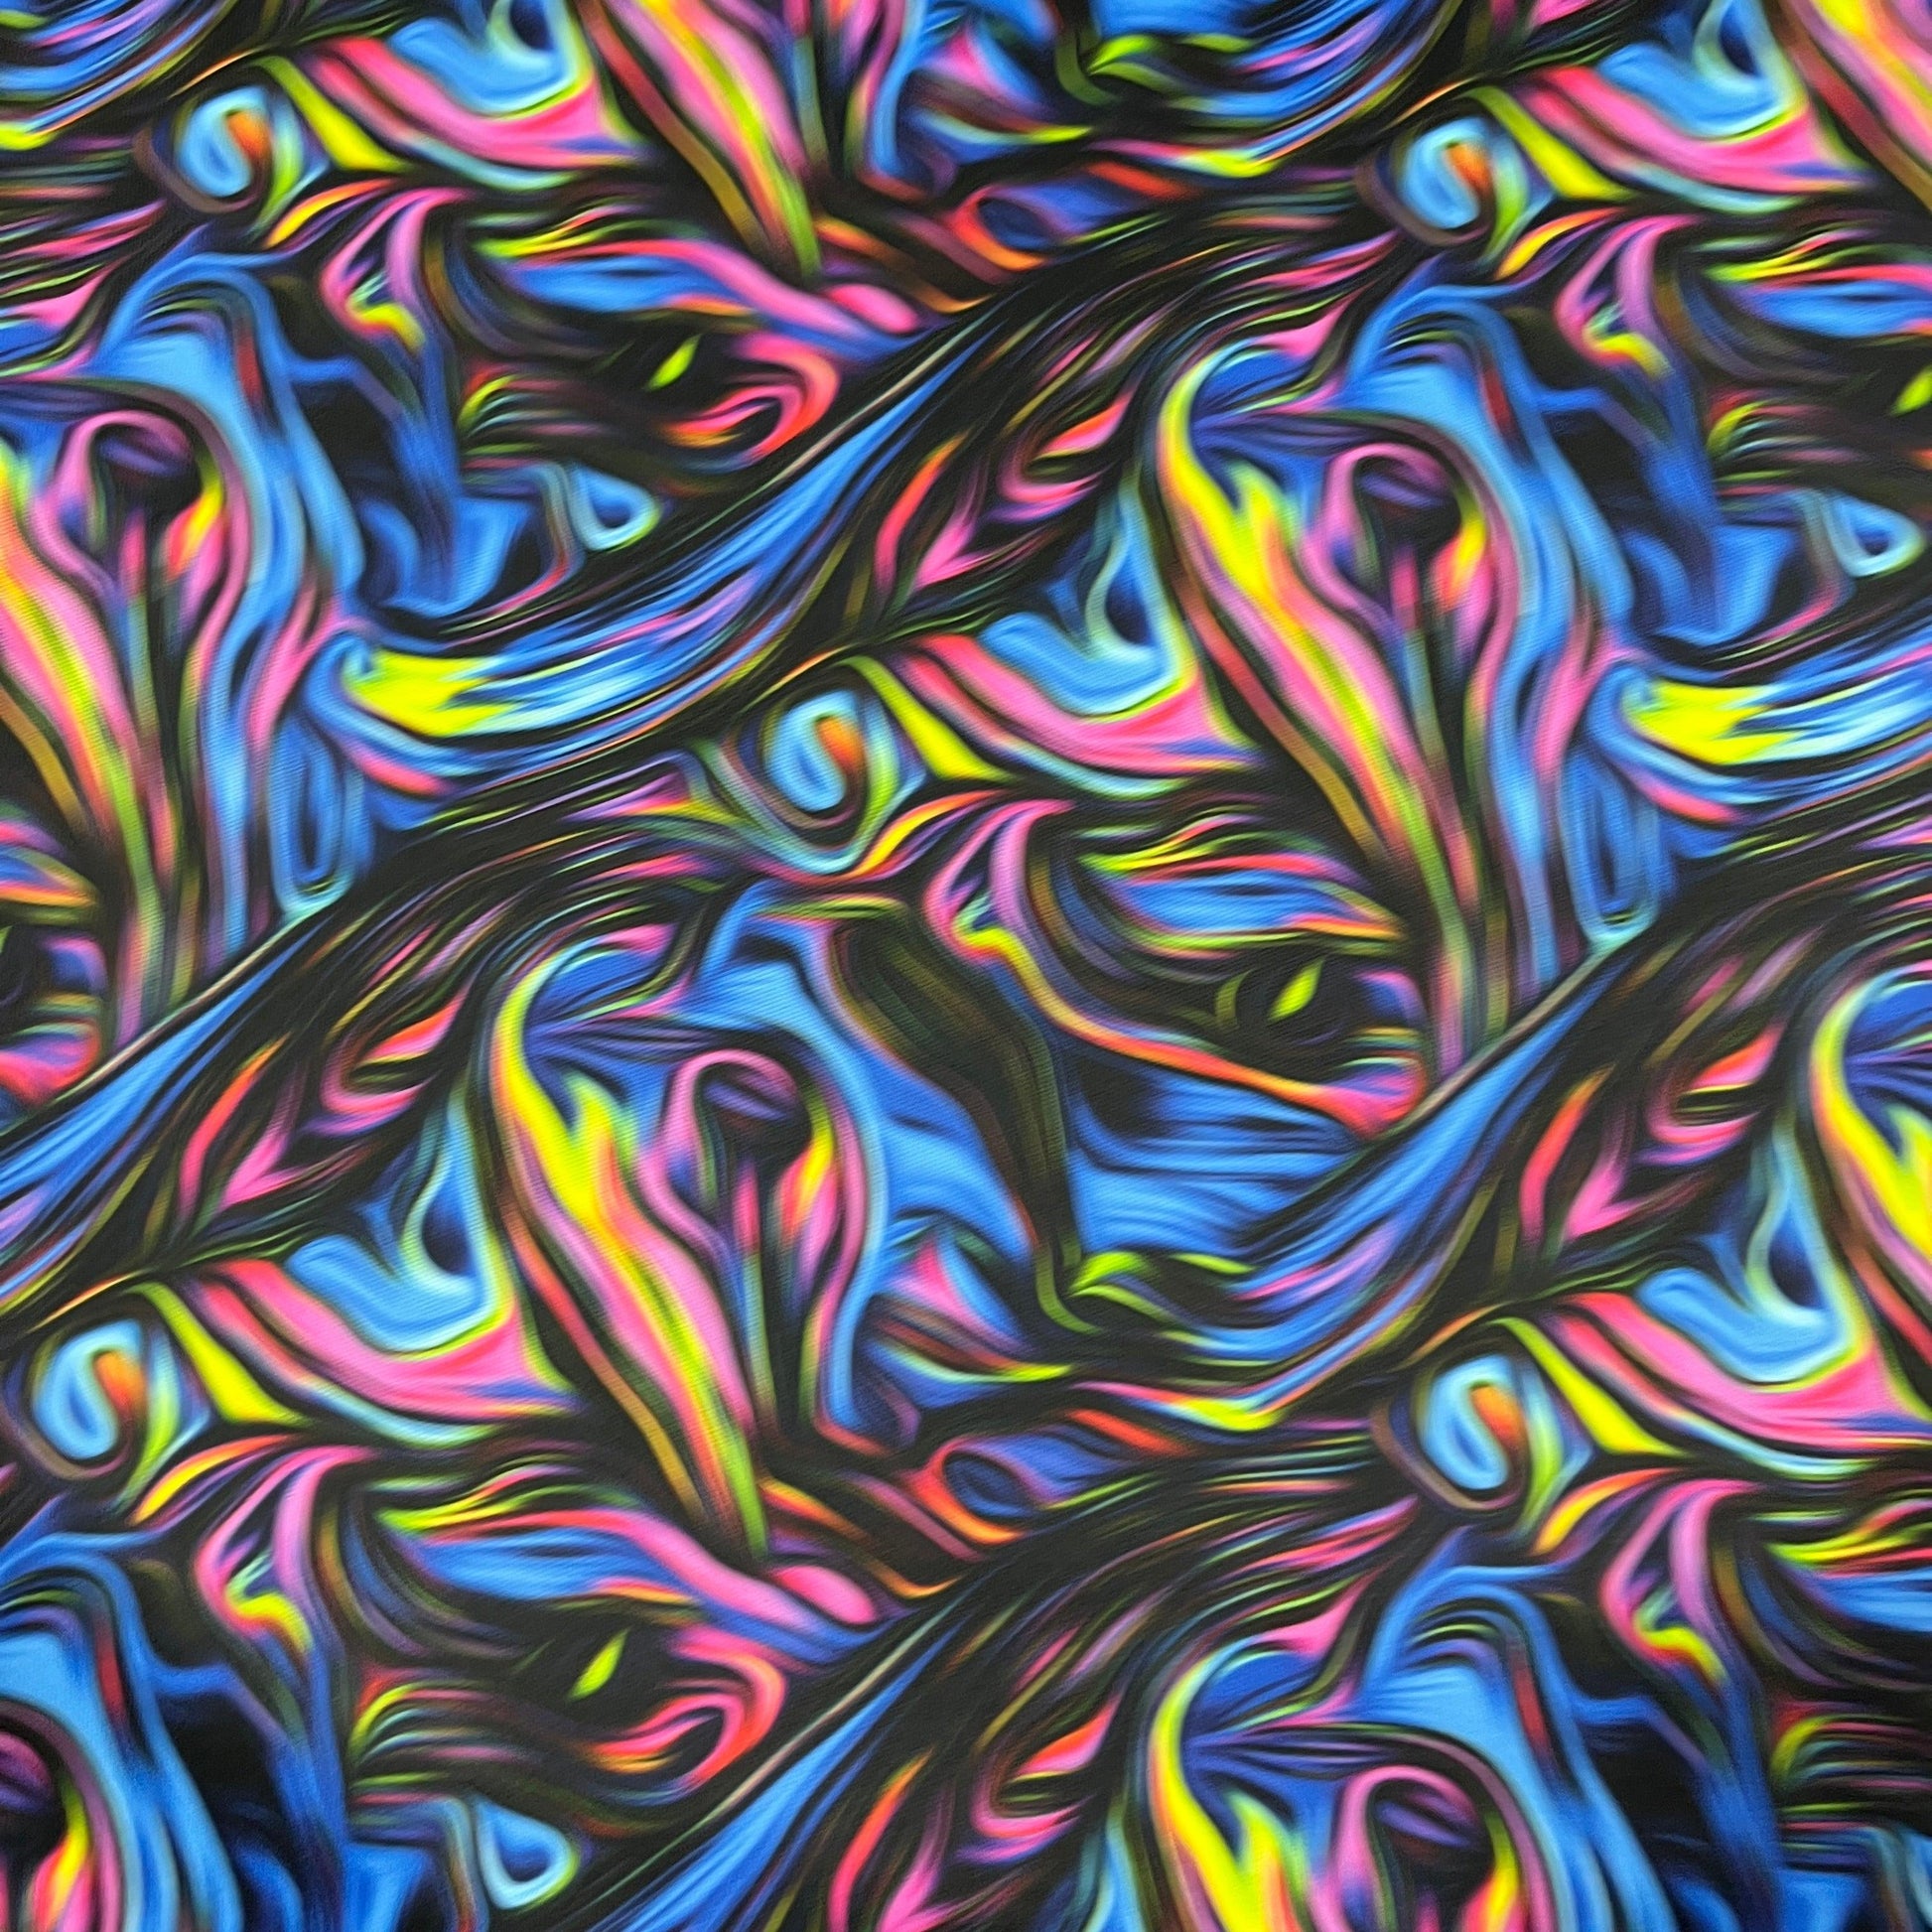 Psychedelic Swirl on 1 mil PUL Fabric - Made in the USA - Nature's Fabrics